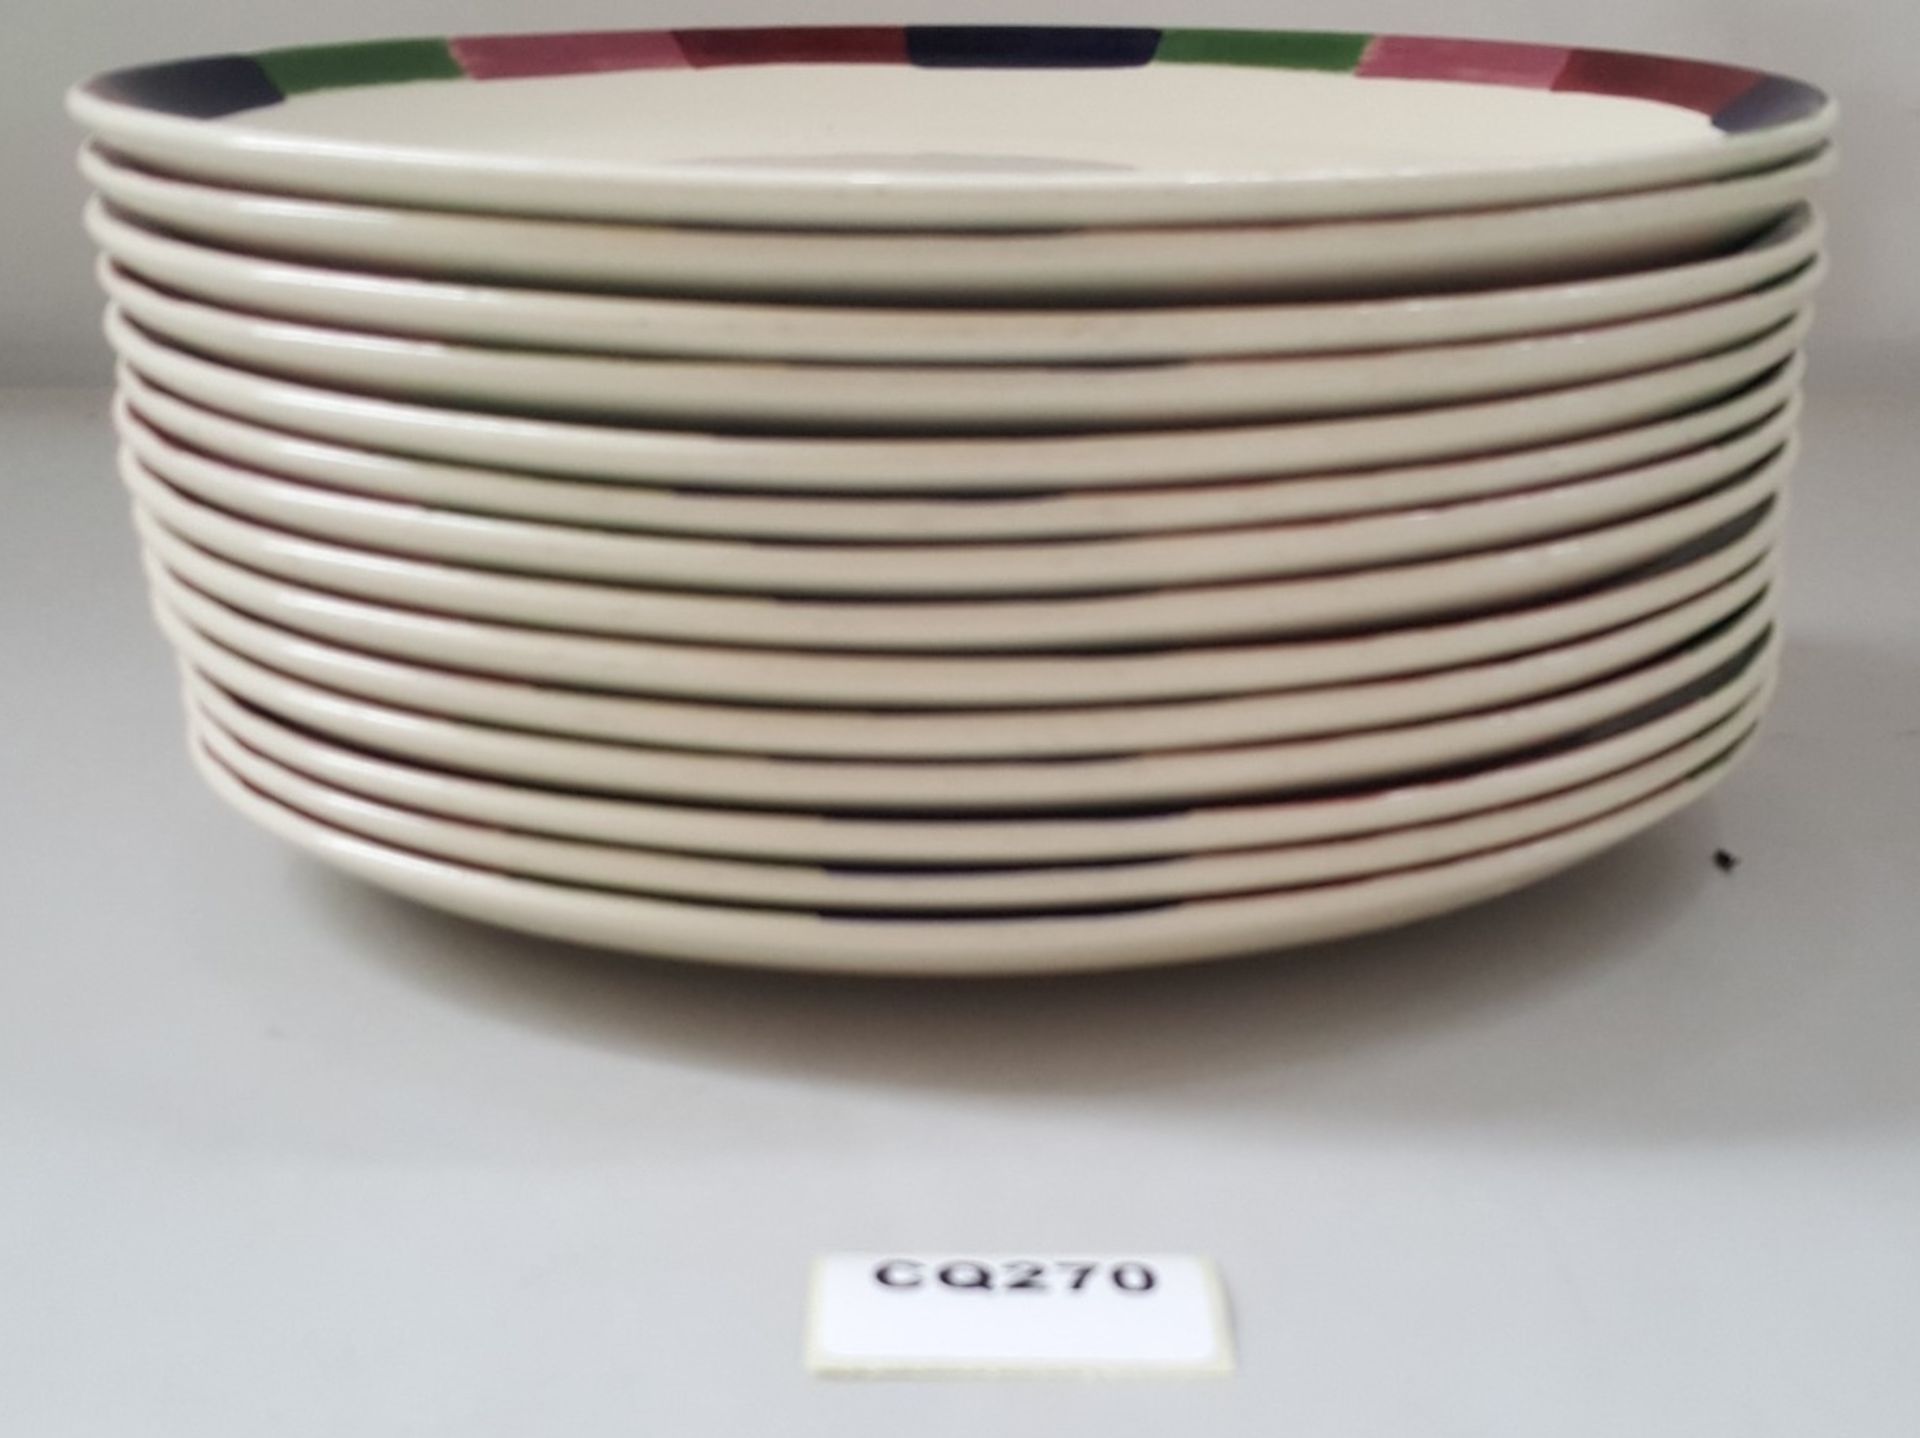 14 x Steelite Oval Serving Plates Cream With Patterned Edge L30/W23.5CM - Ref CQ270 - Image 2 of 4